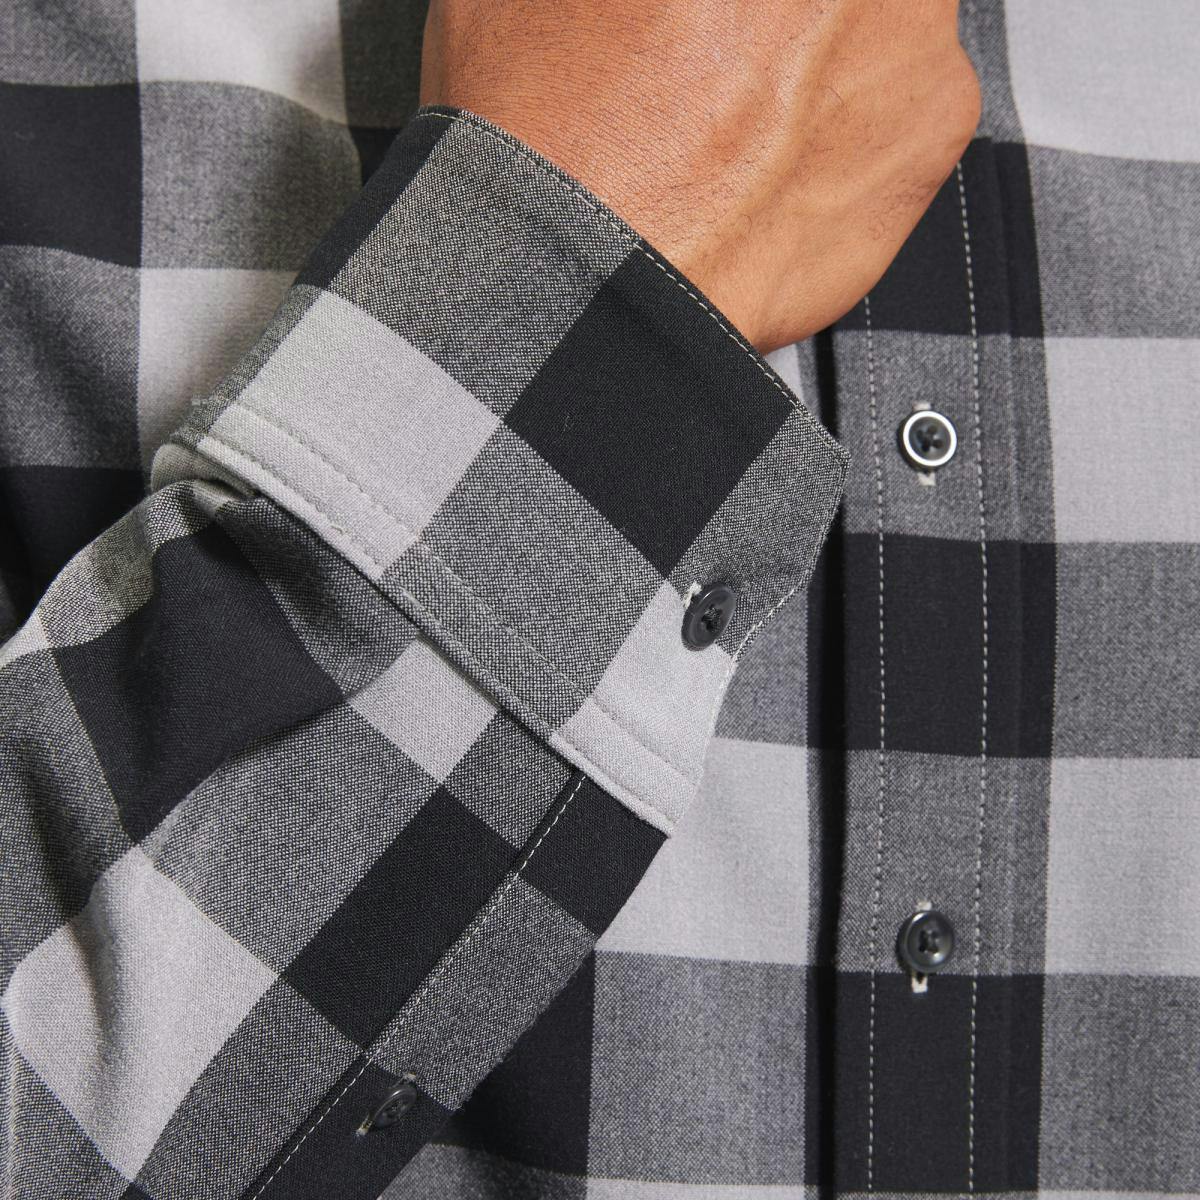 City Flannel - Product Image 5